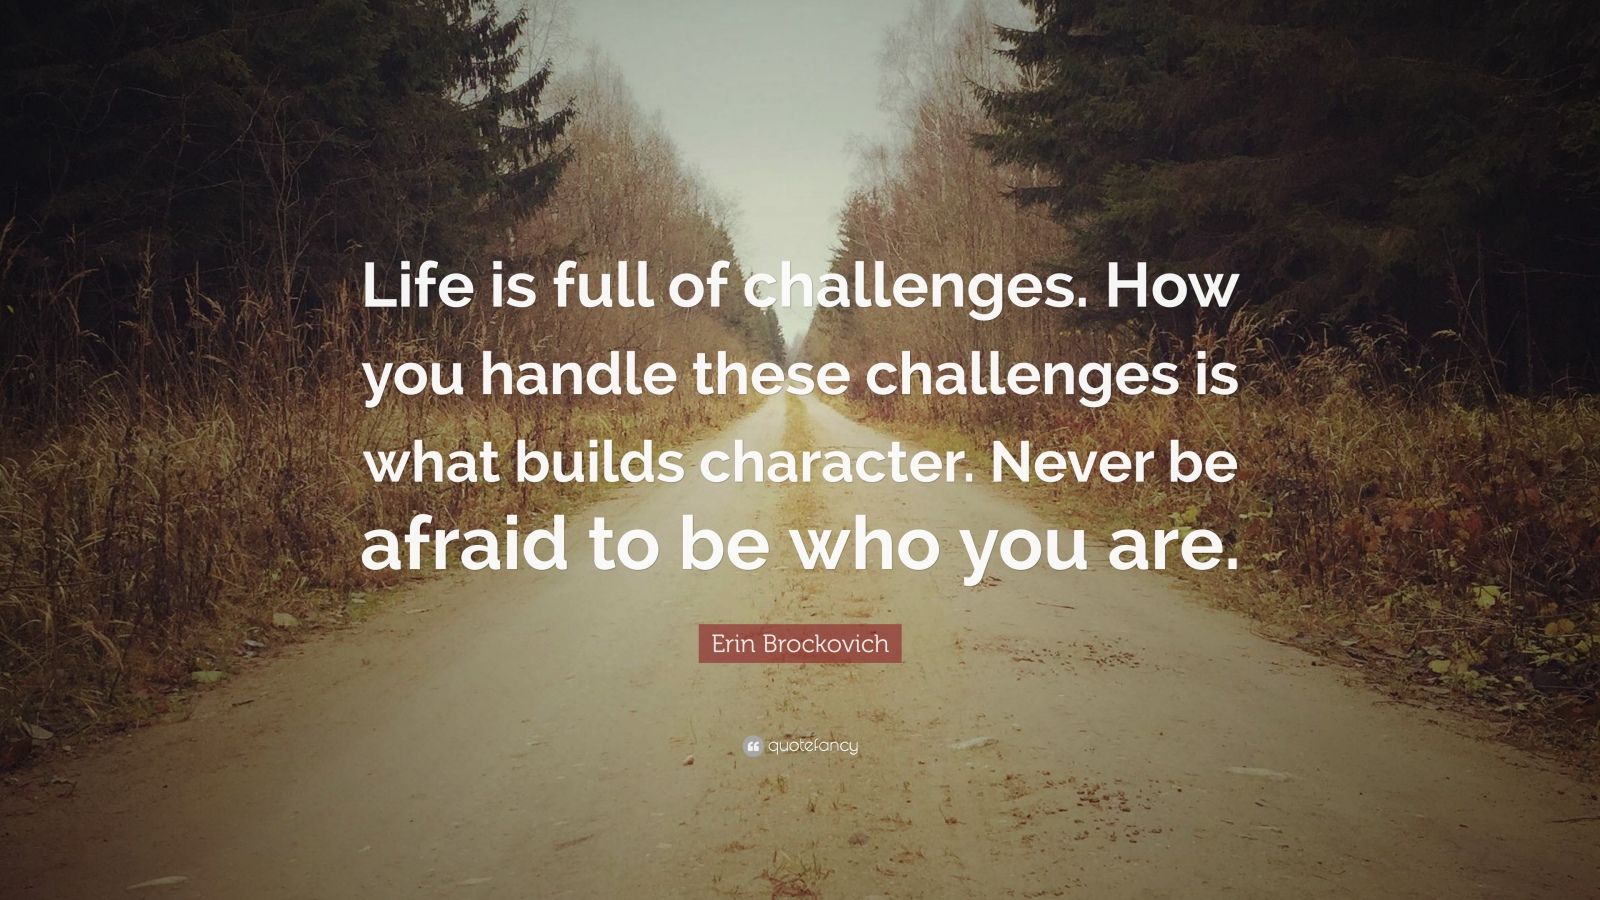 Erin Brockovich Quote: “Life is full of challenges. How you handle